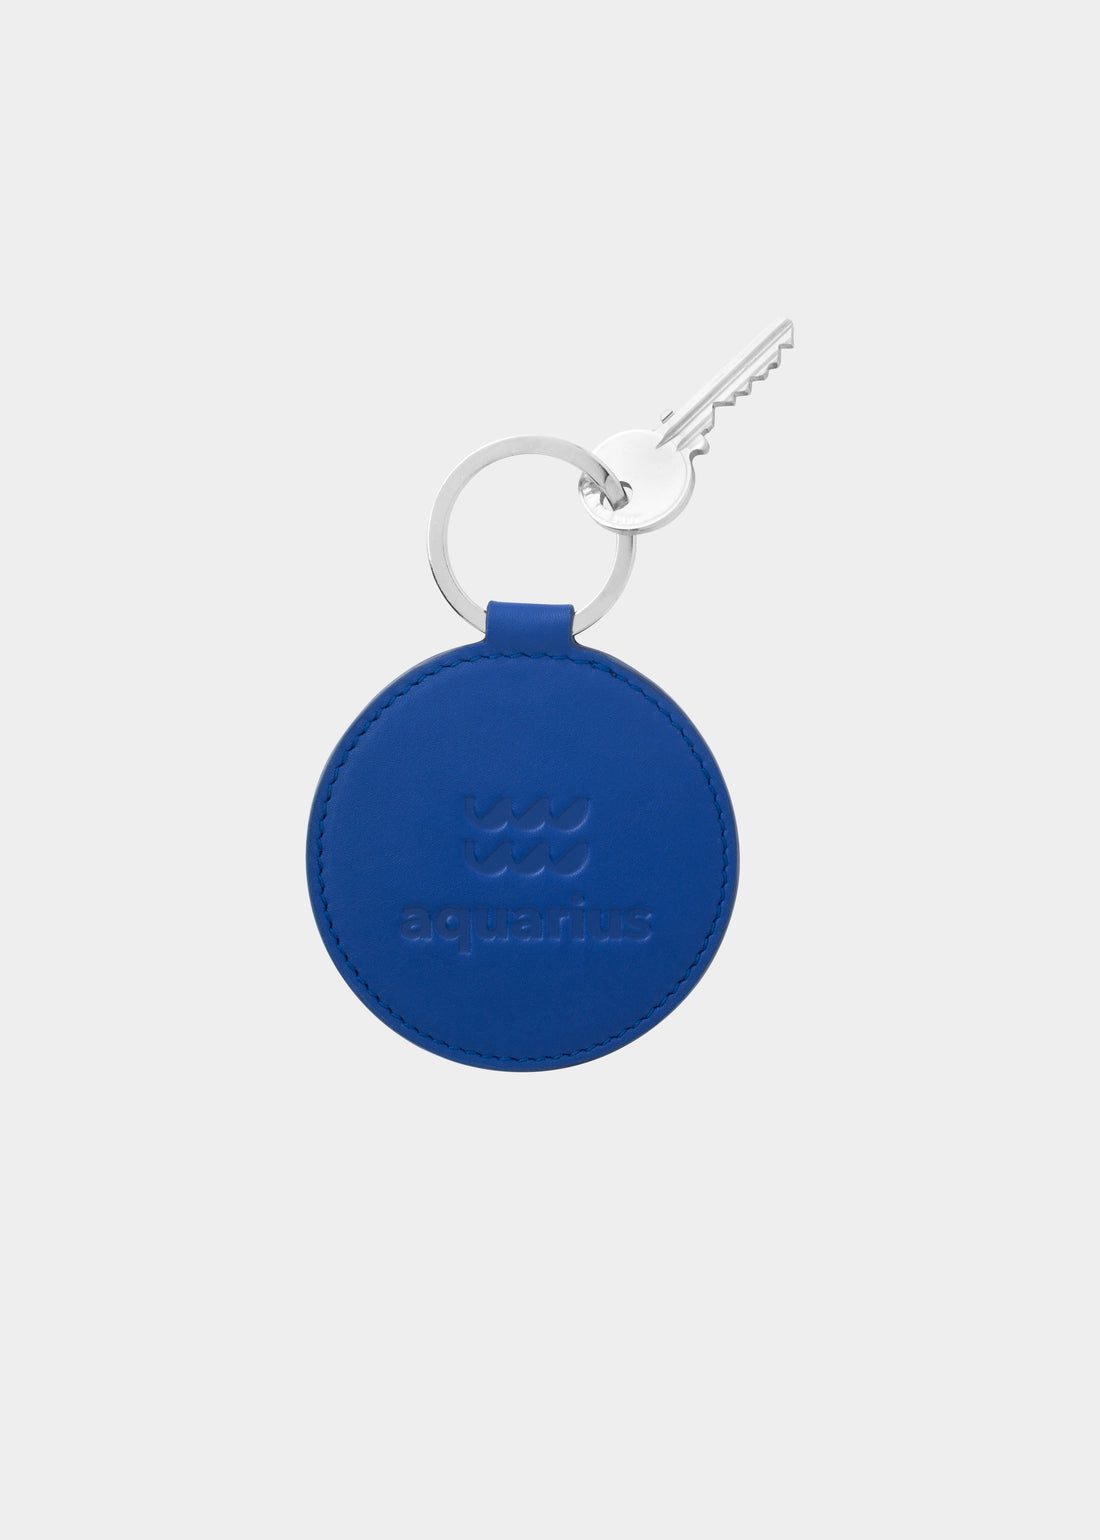 Dooz Aquarius cobalt blue leather keychain with embossed zodiac glyph and silver keyring